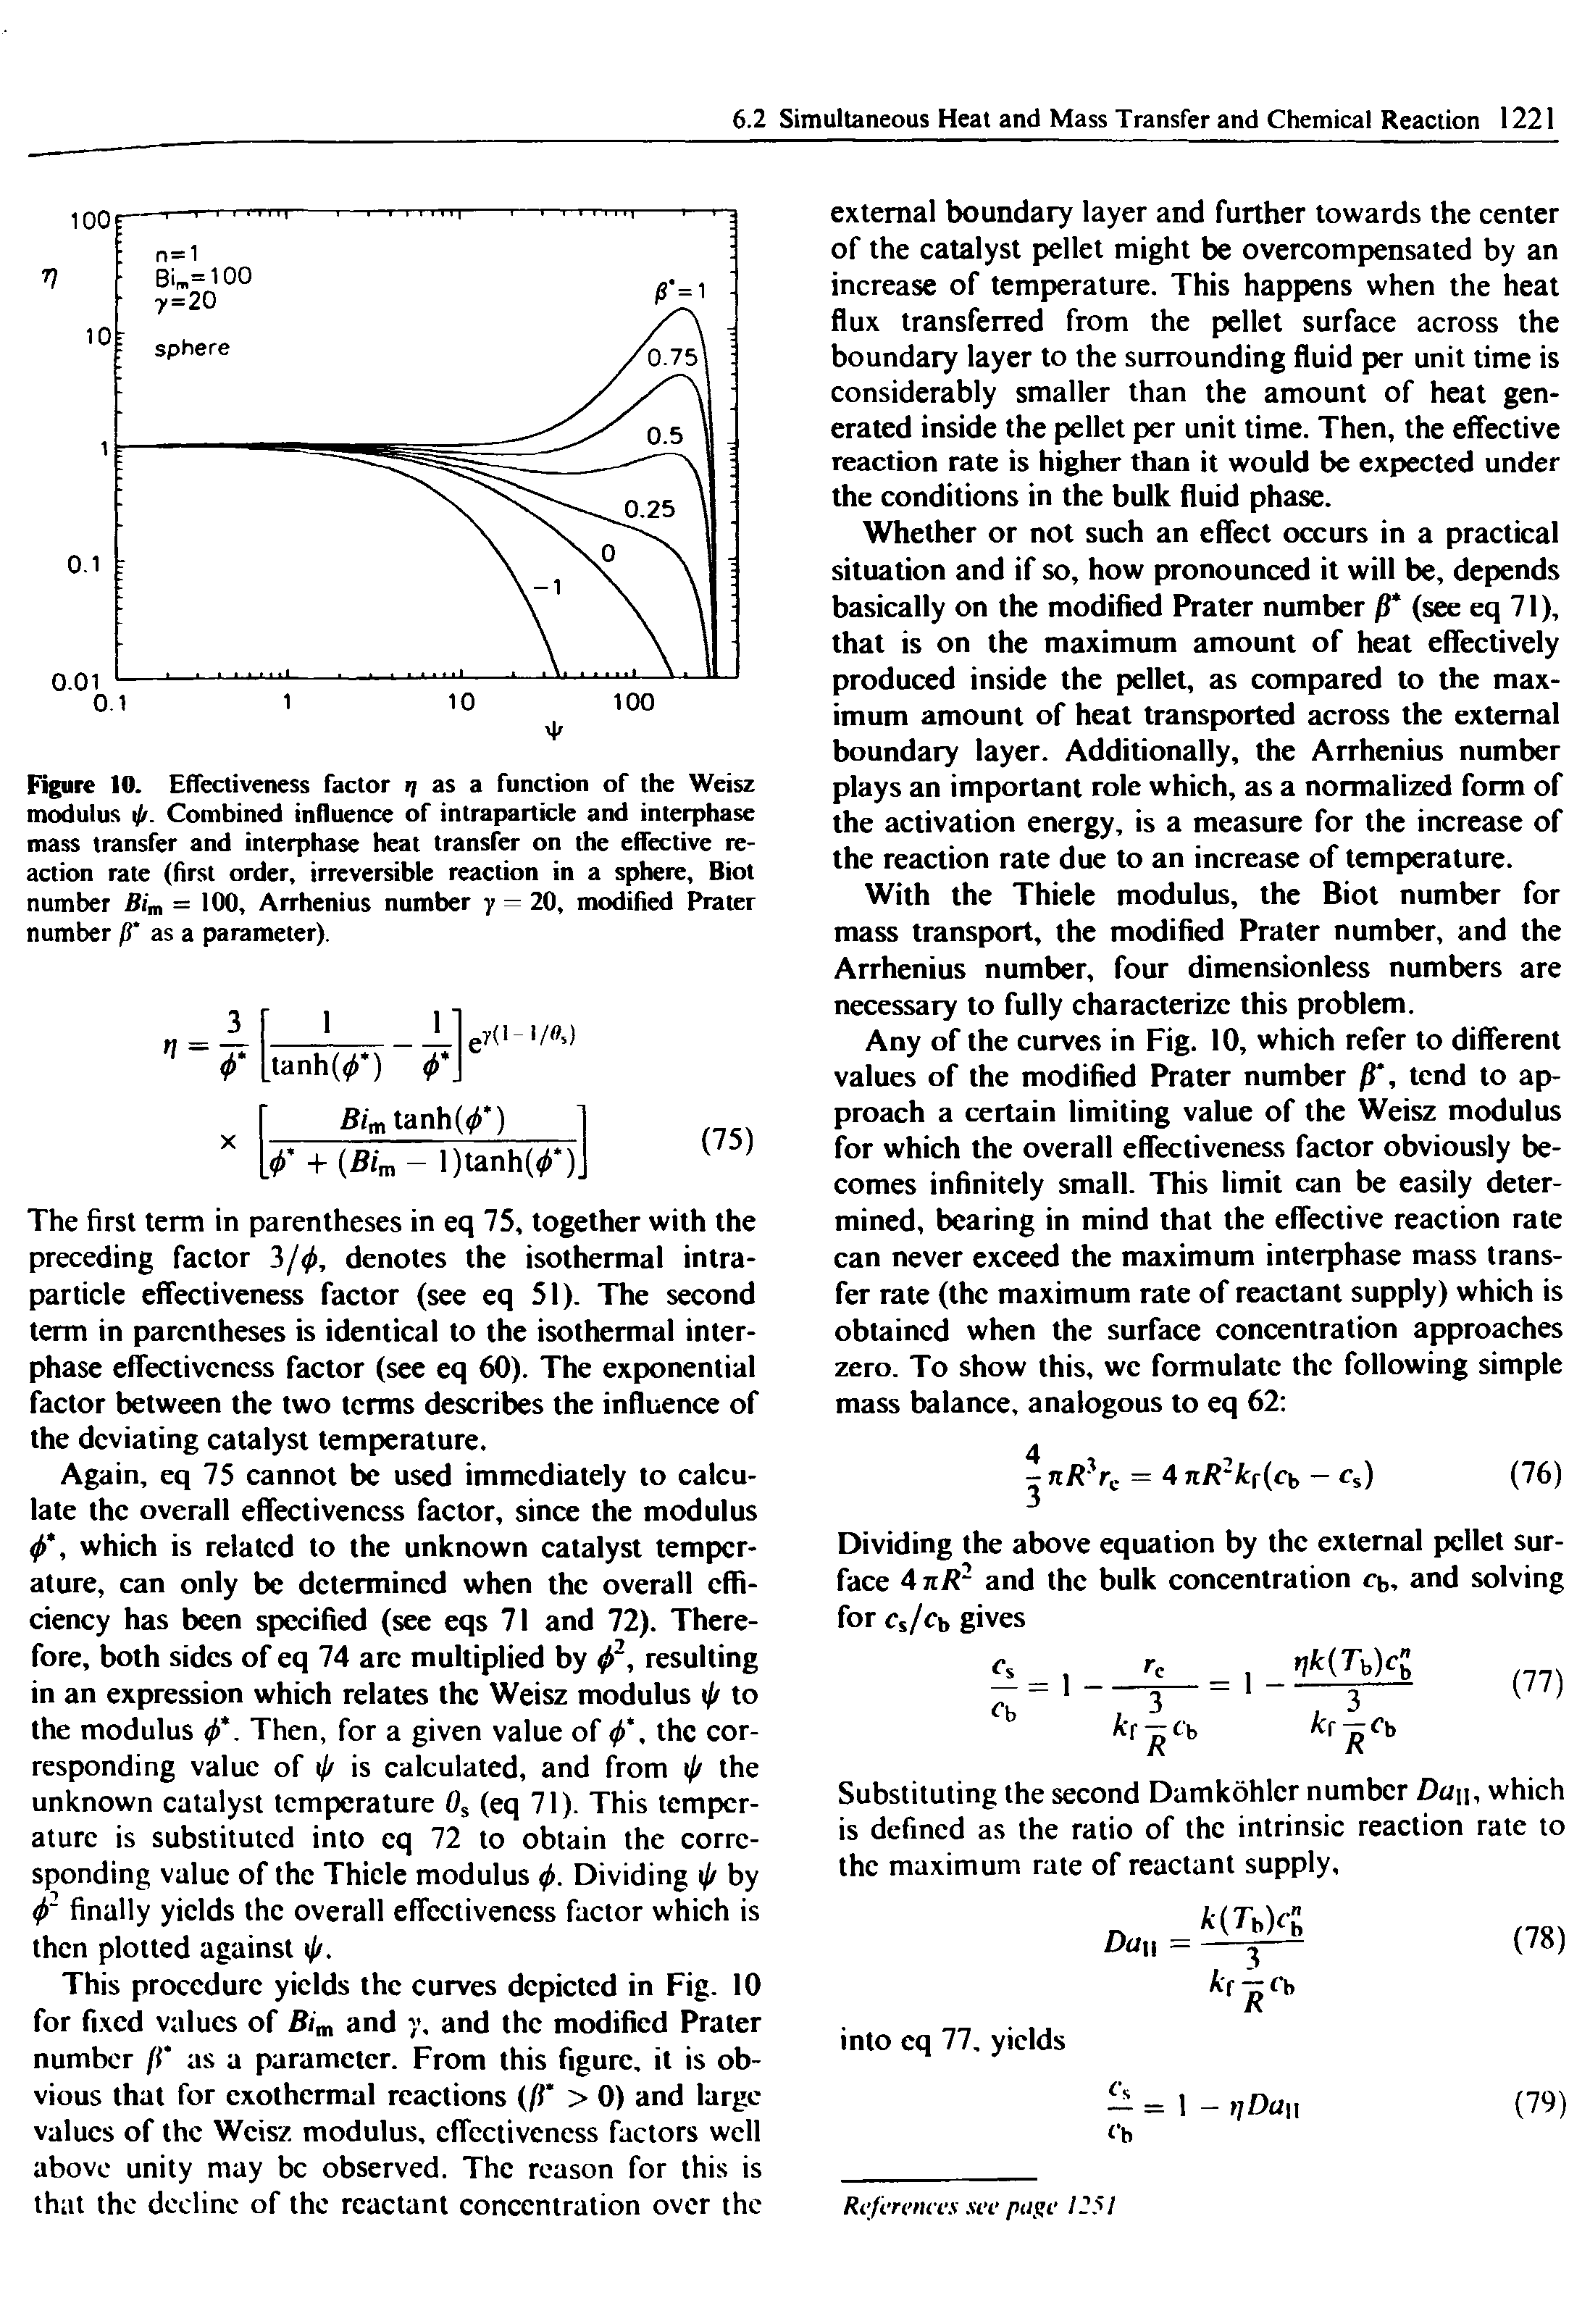 Figure 10. Effectiveness factor ij as a function of the Weisz modulus ji. Combined influence of intraparticle and interphase mass transfer and interphase heat transfer on the effective reaction rate (first order, irreversible reaction in a sphere, Biot number Bim = 100, Arrhenius number y — 20, modified Prater number ( as a parameter).